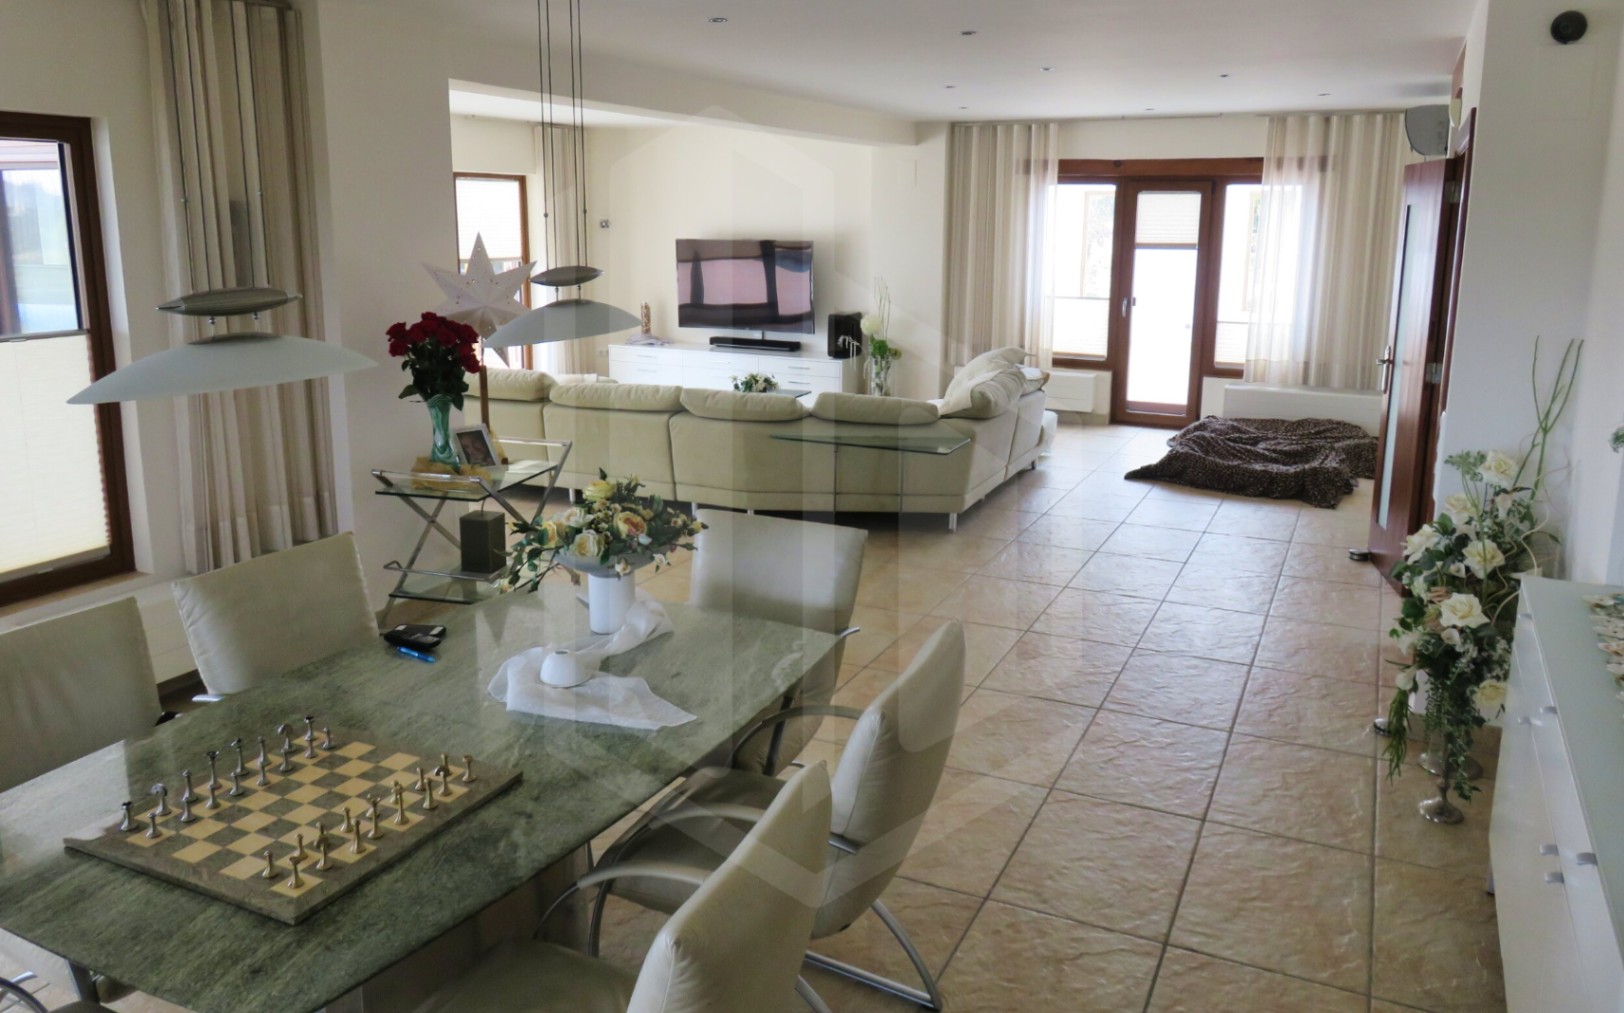 Luxury sea view country house in Benissa Costa Blanca